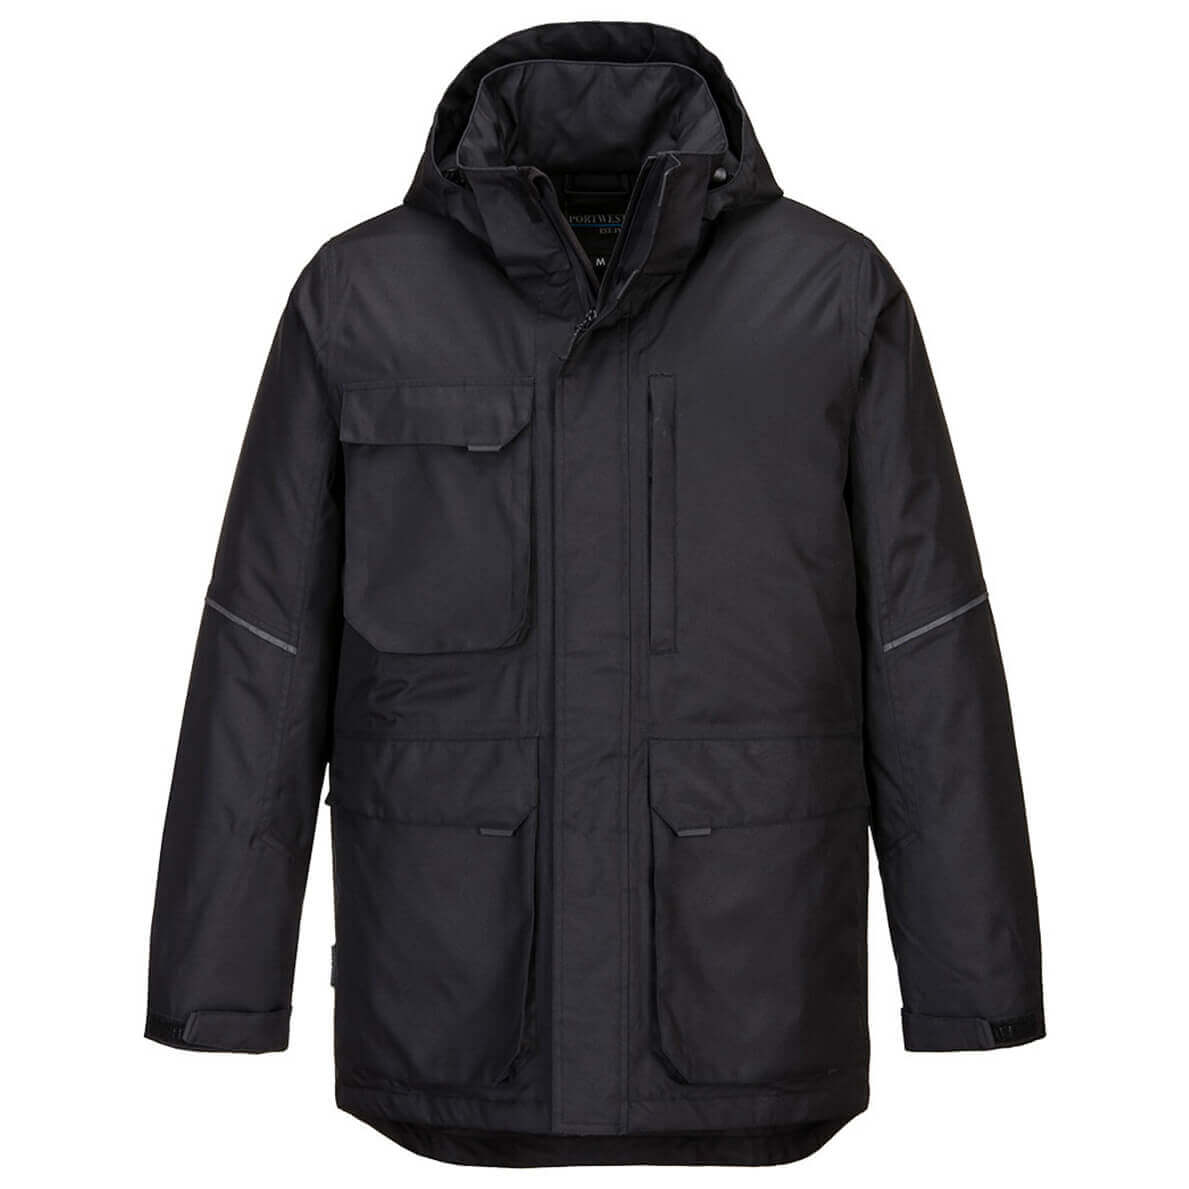 This jacket oozes style and functionality while enduring harsh weather.  Black Portwest KX360 KX3 Parka Jacket